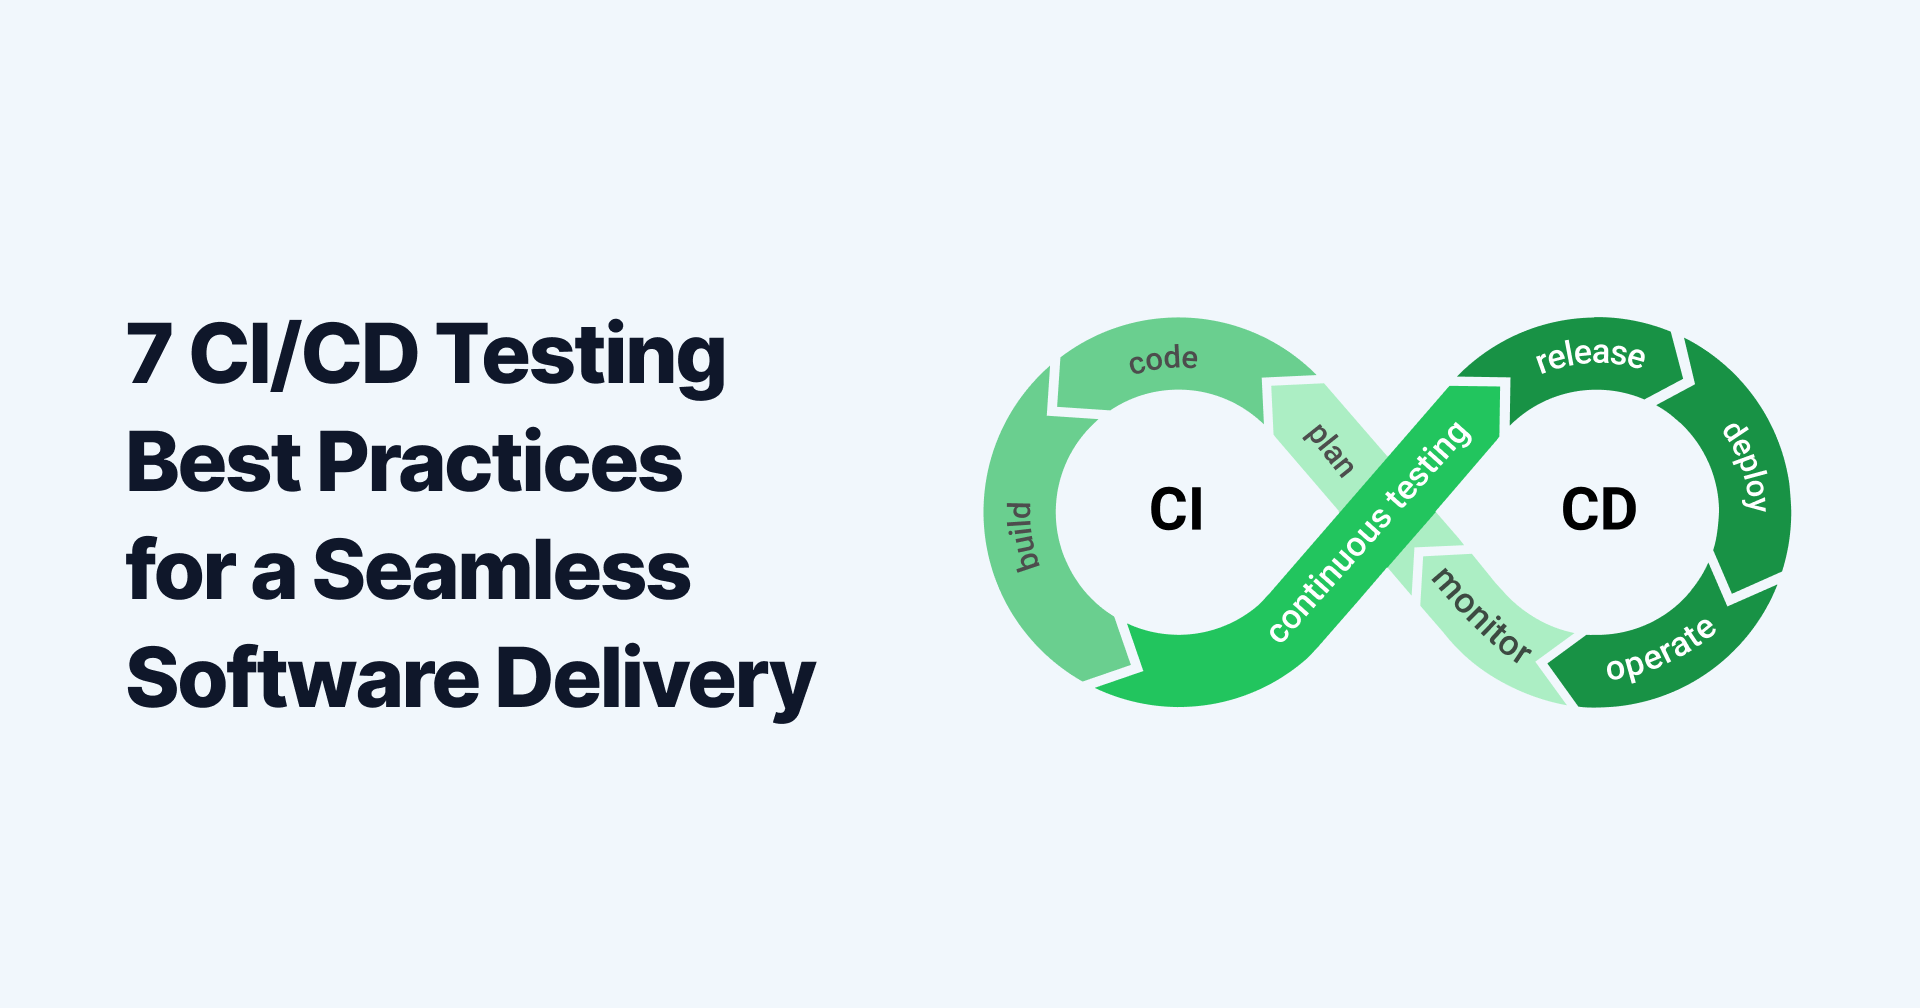 7 CI/CD Testing Best Practices for a Seamless Software Delivery